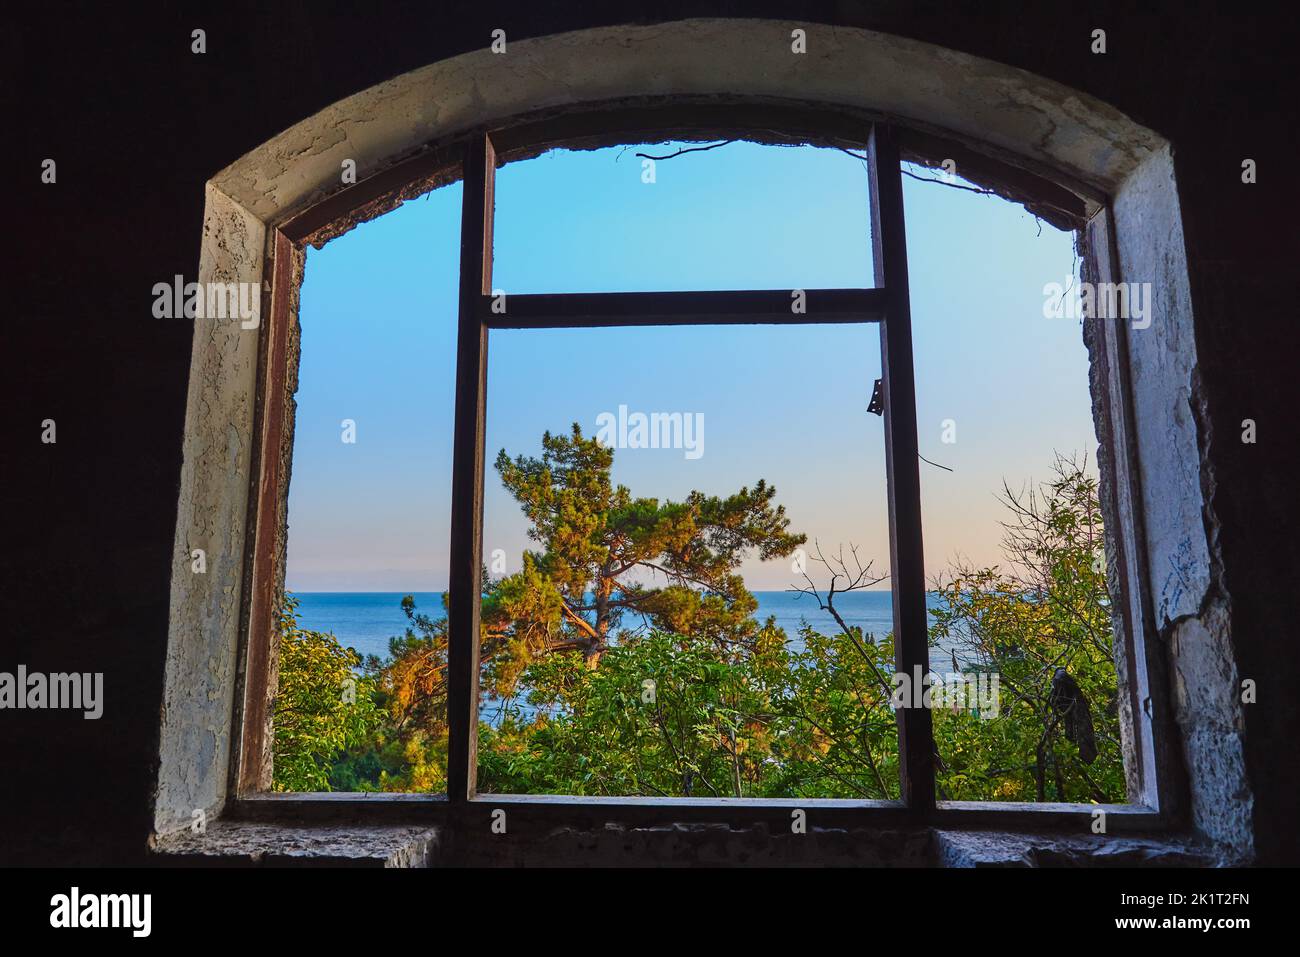 View through an old cracked window to the sea and trees illuminated by the setting sun. Stock Photo